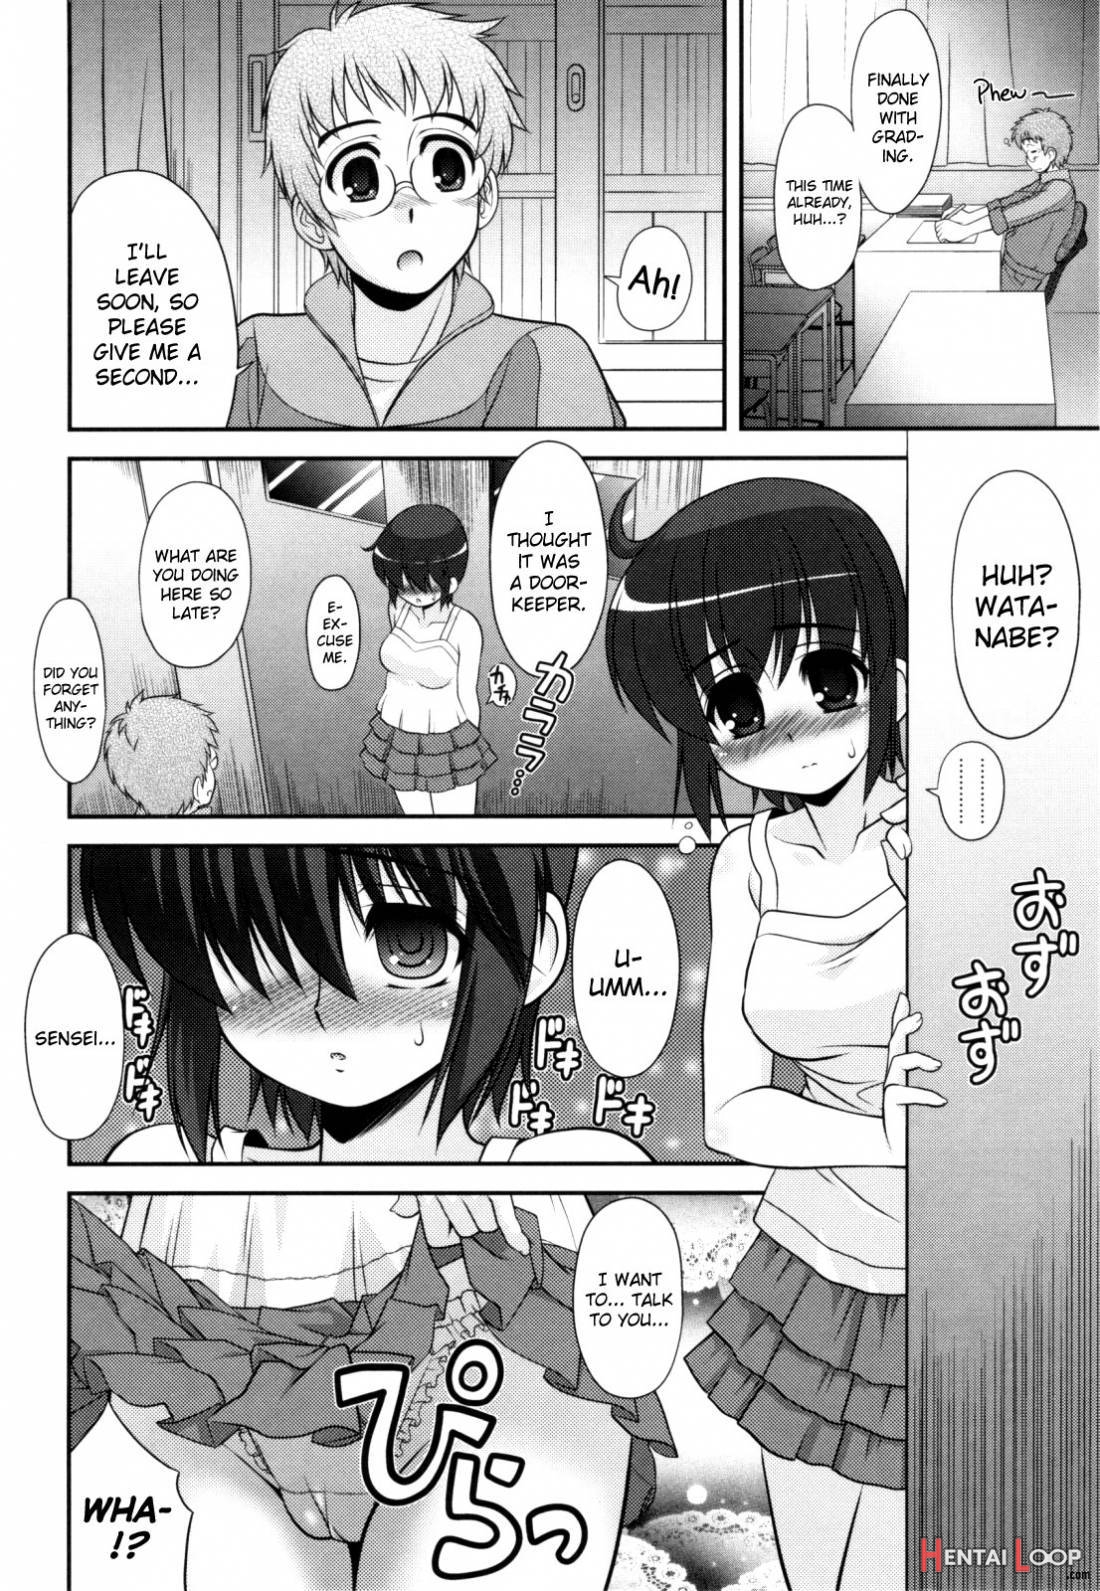 Aoi-chan Attack! page 9